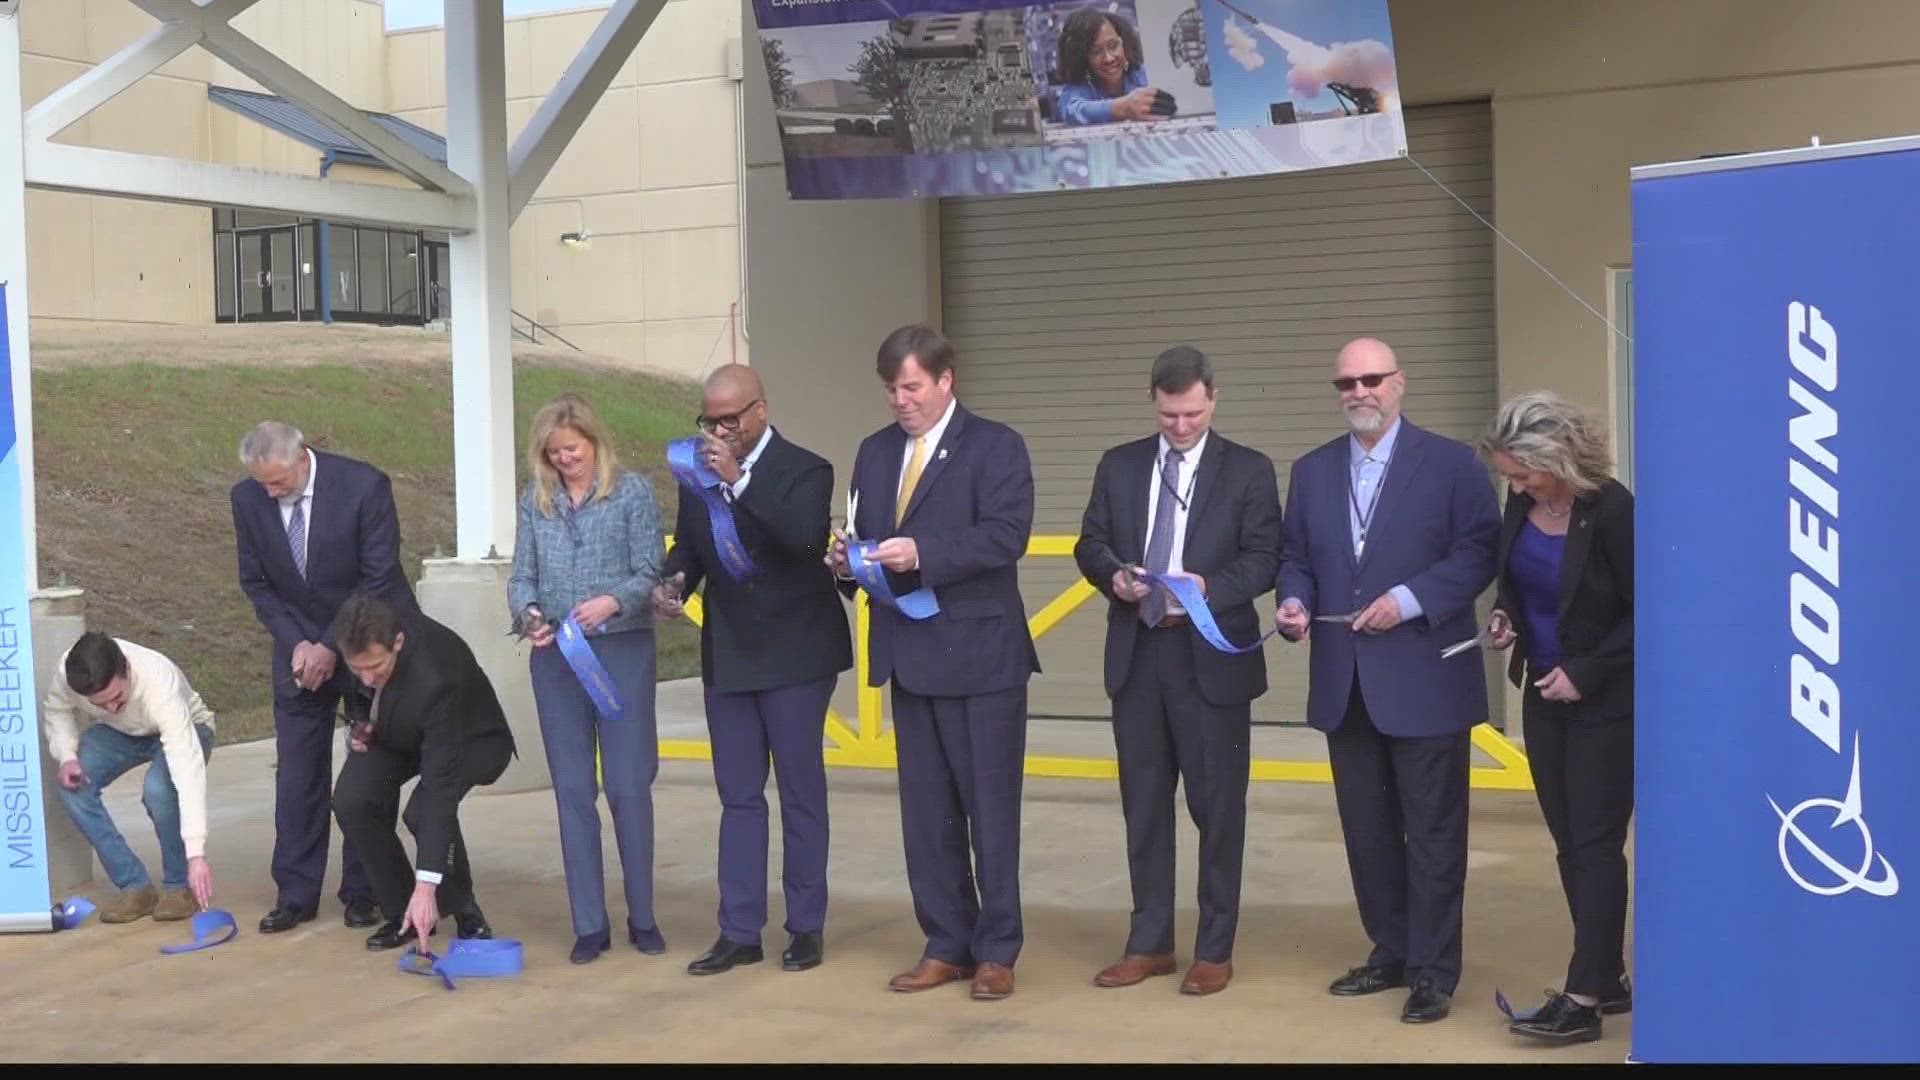 It's a new  9,000 sq. ft. expansion of the Huntsville Electronics Center of Excellence, which produces hardware for Boeing defense, space & security systems.